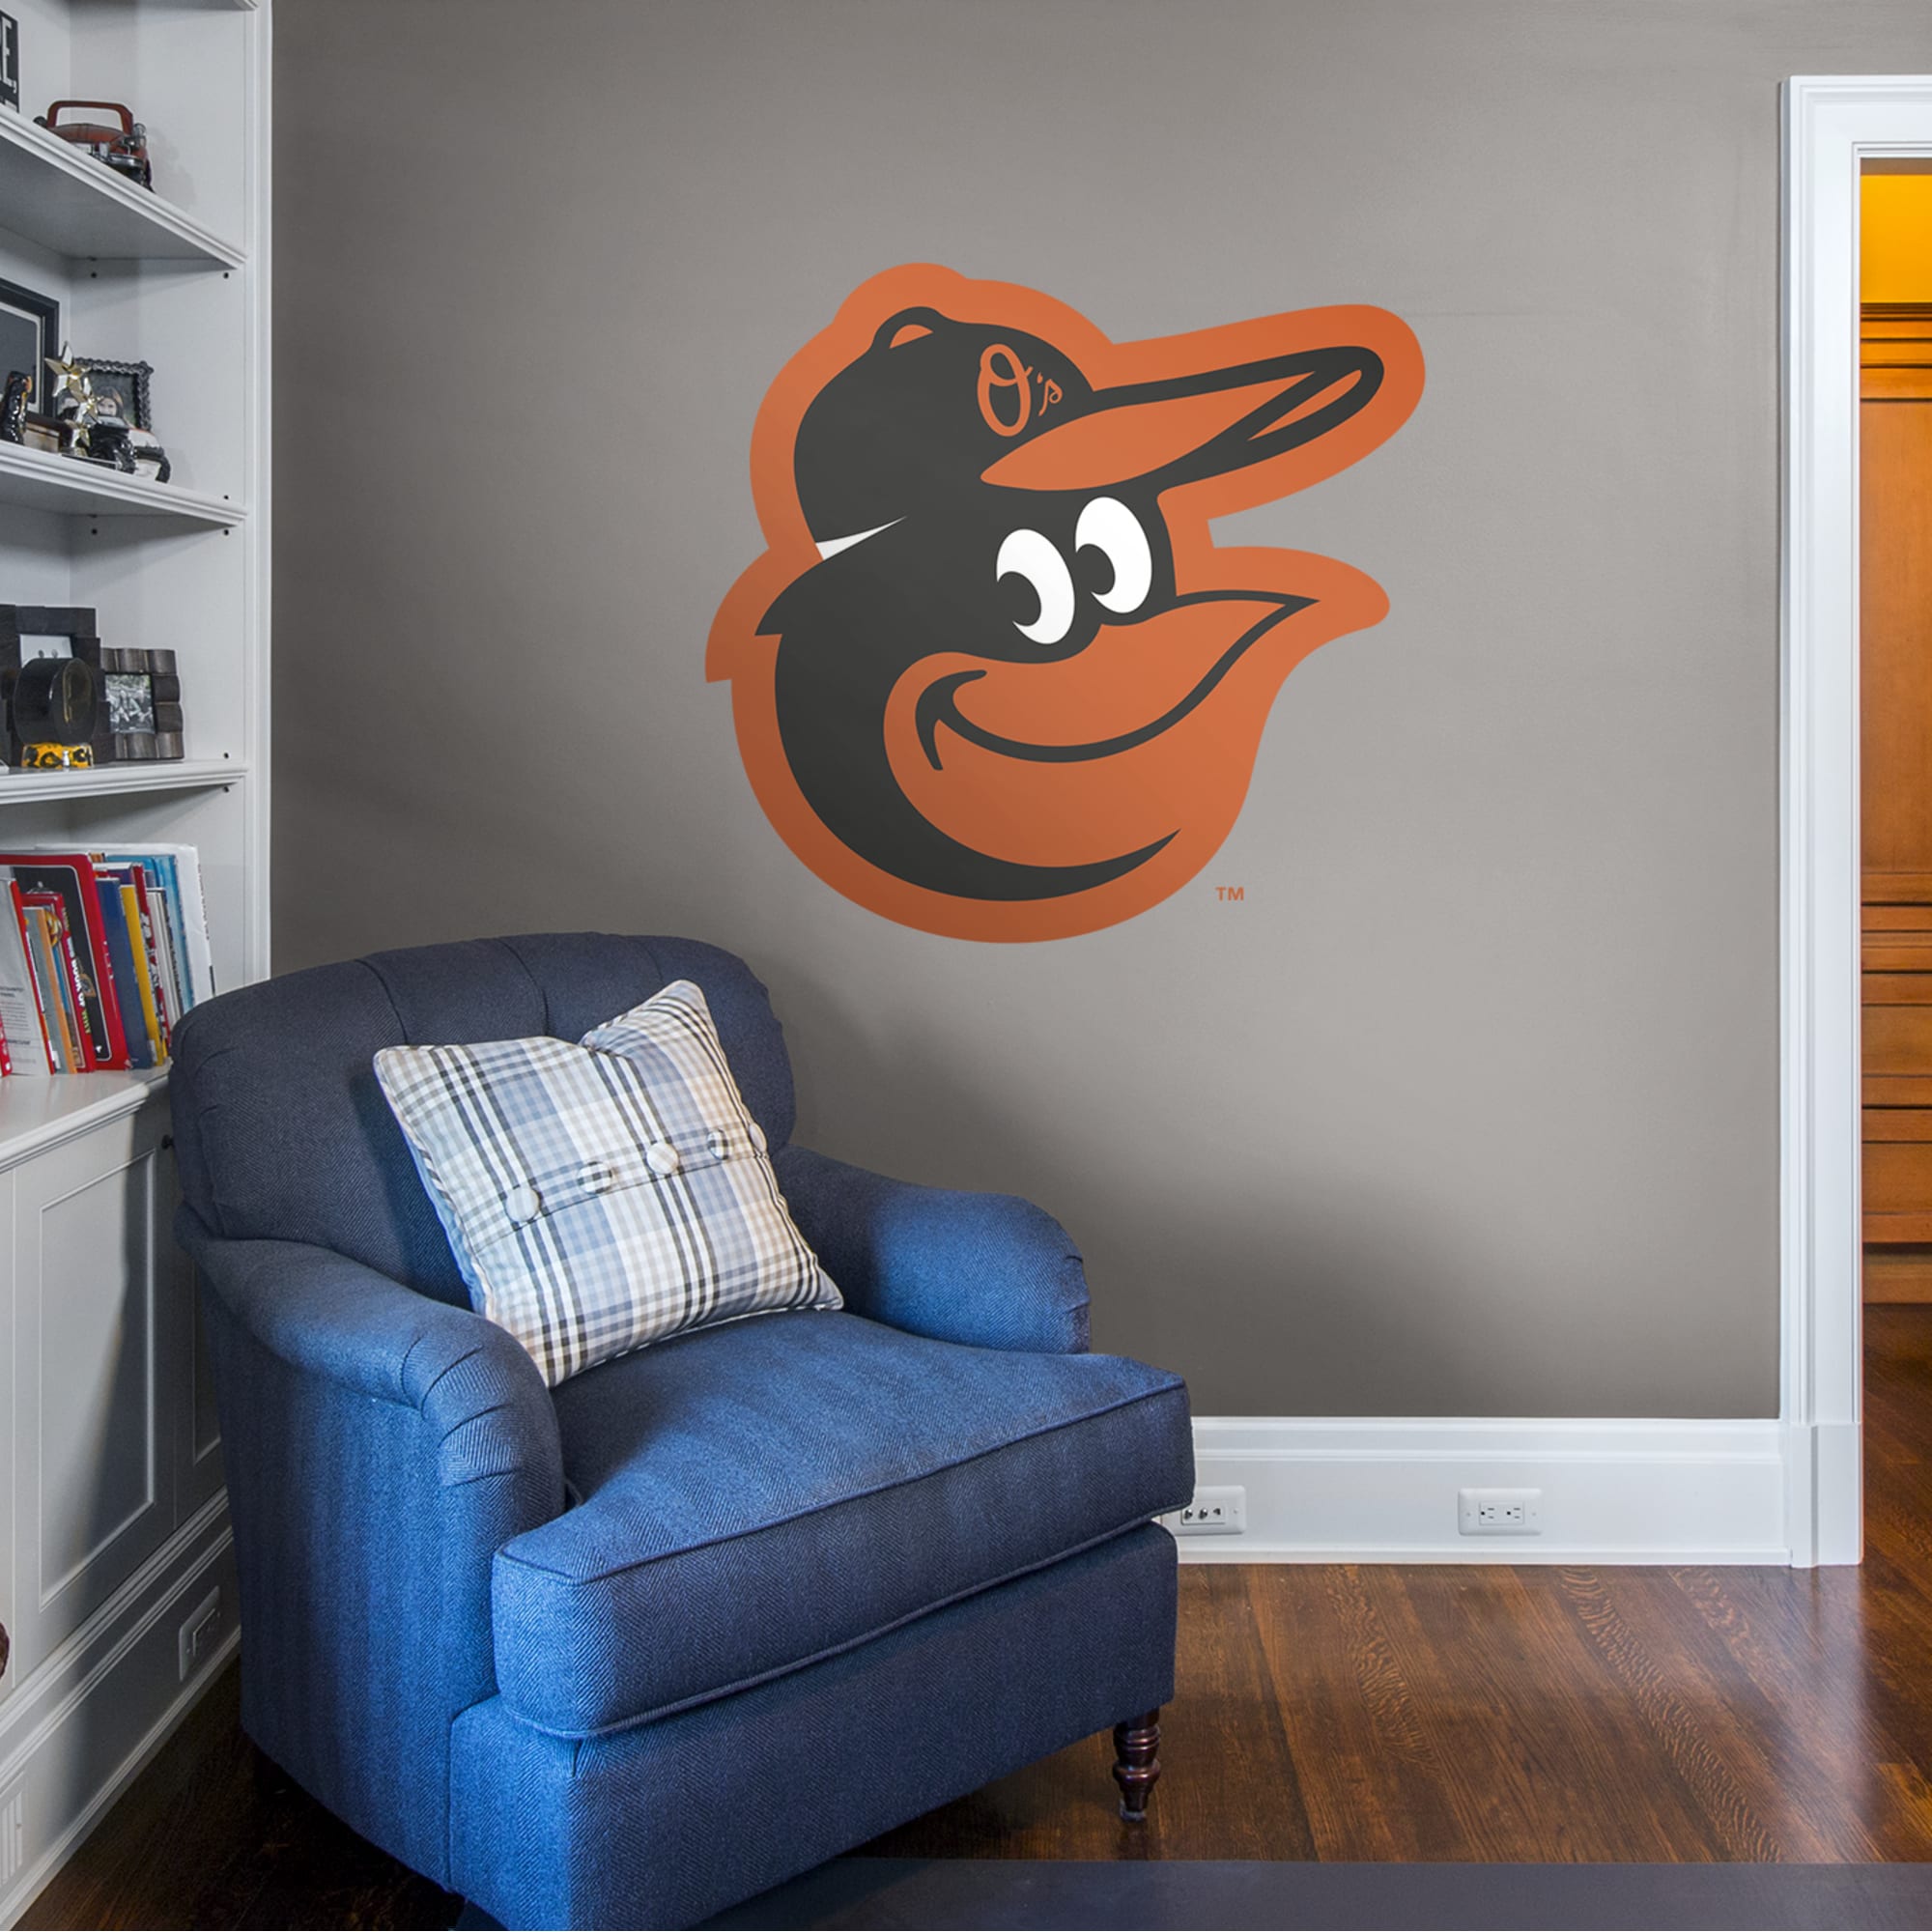 Baltimore Orioles: Alternate Logo - Officially Licensed MLB Removable Wall Decal Giant Logo (41"W x 39"H) by Fathead | Vinyl